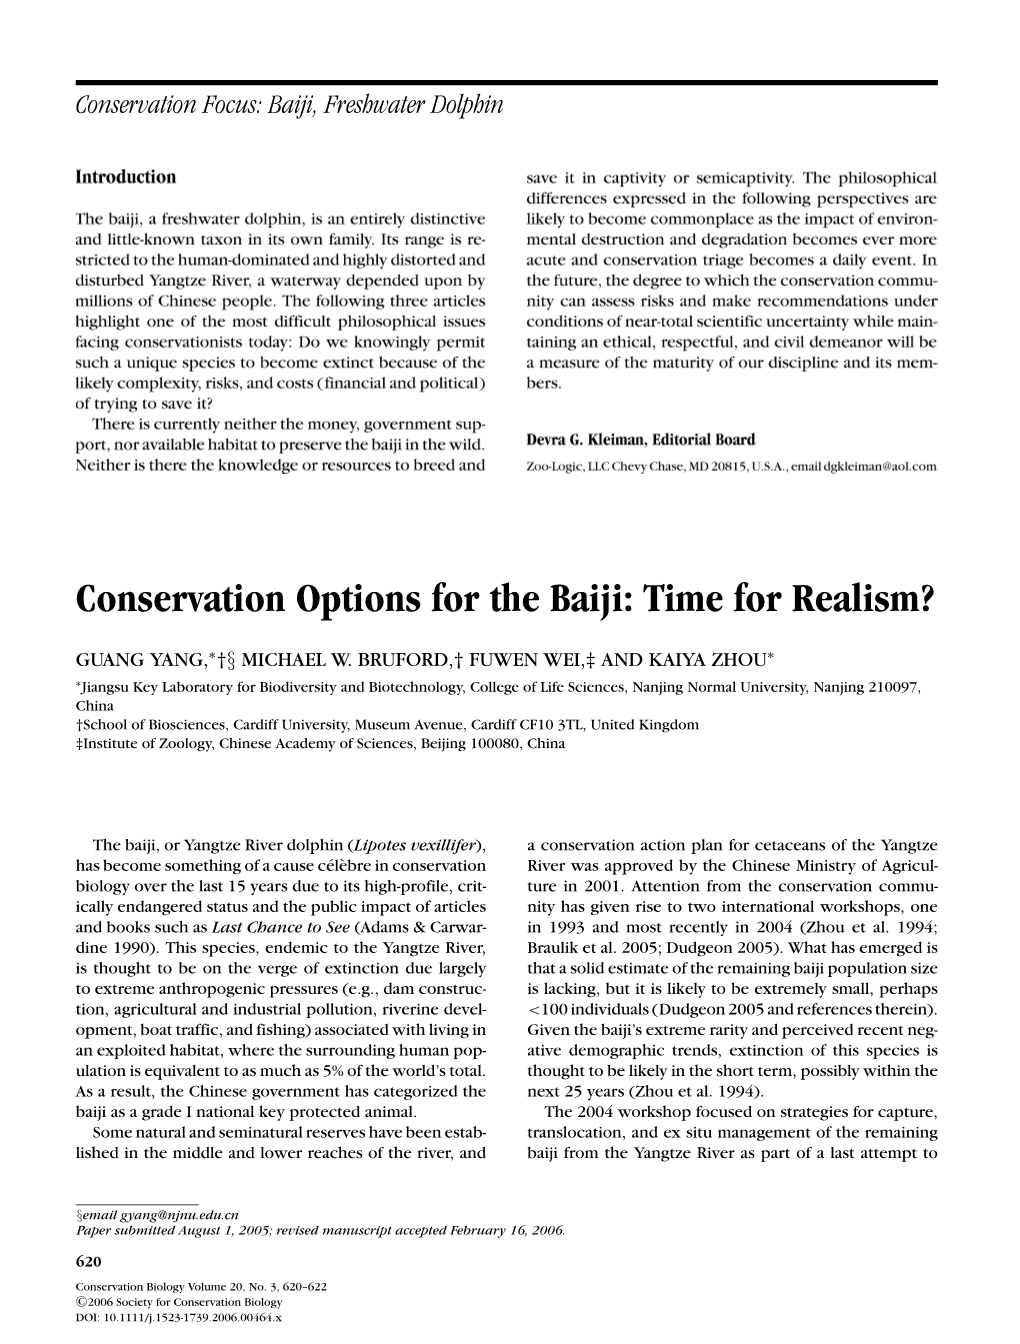 Conservation Options for the Baiji: Time for Realism?